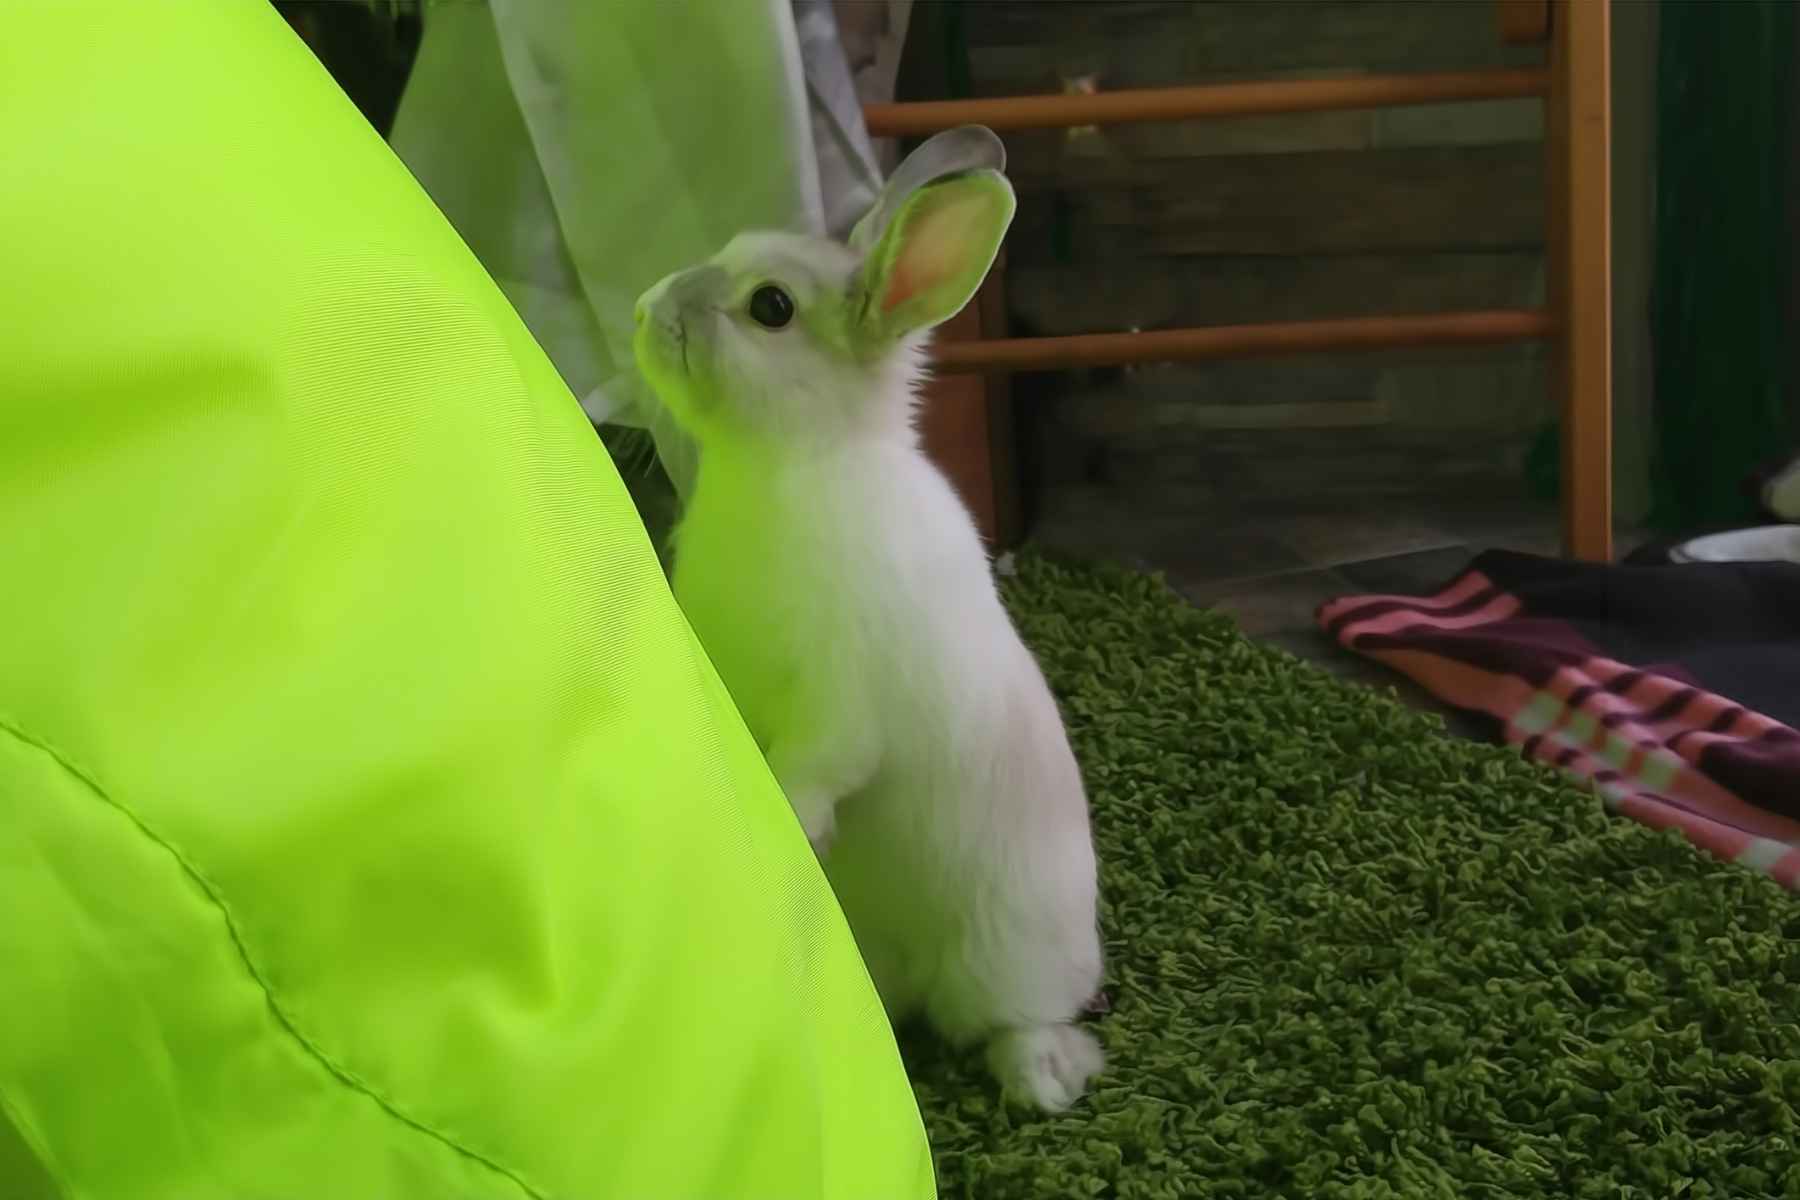 Rabbit considering climbing an obstacle